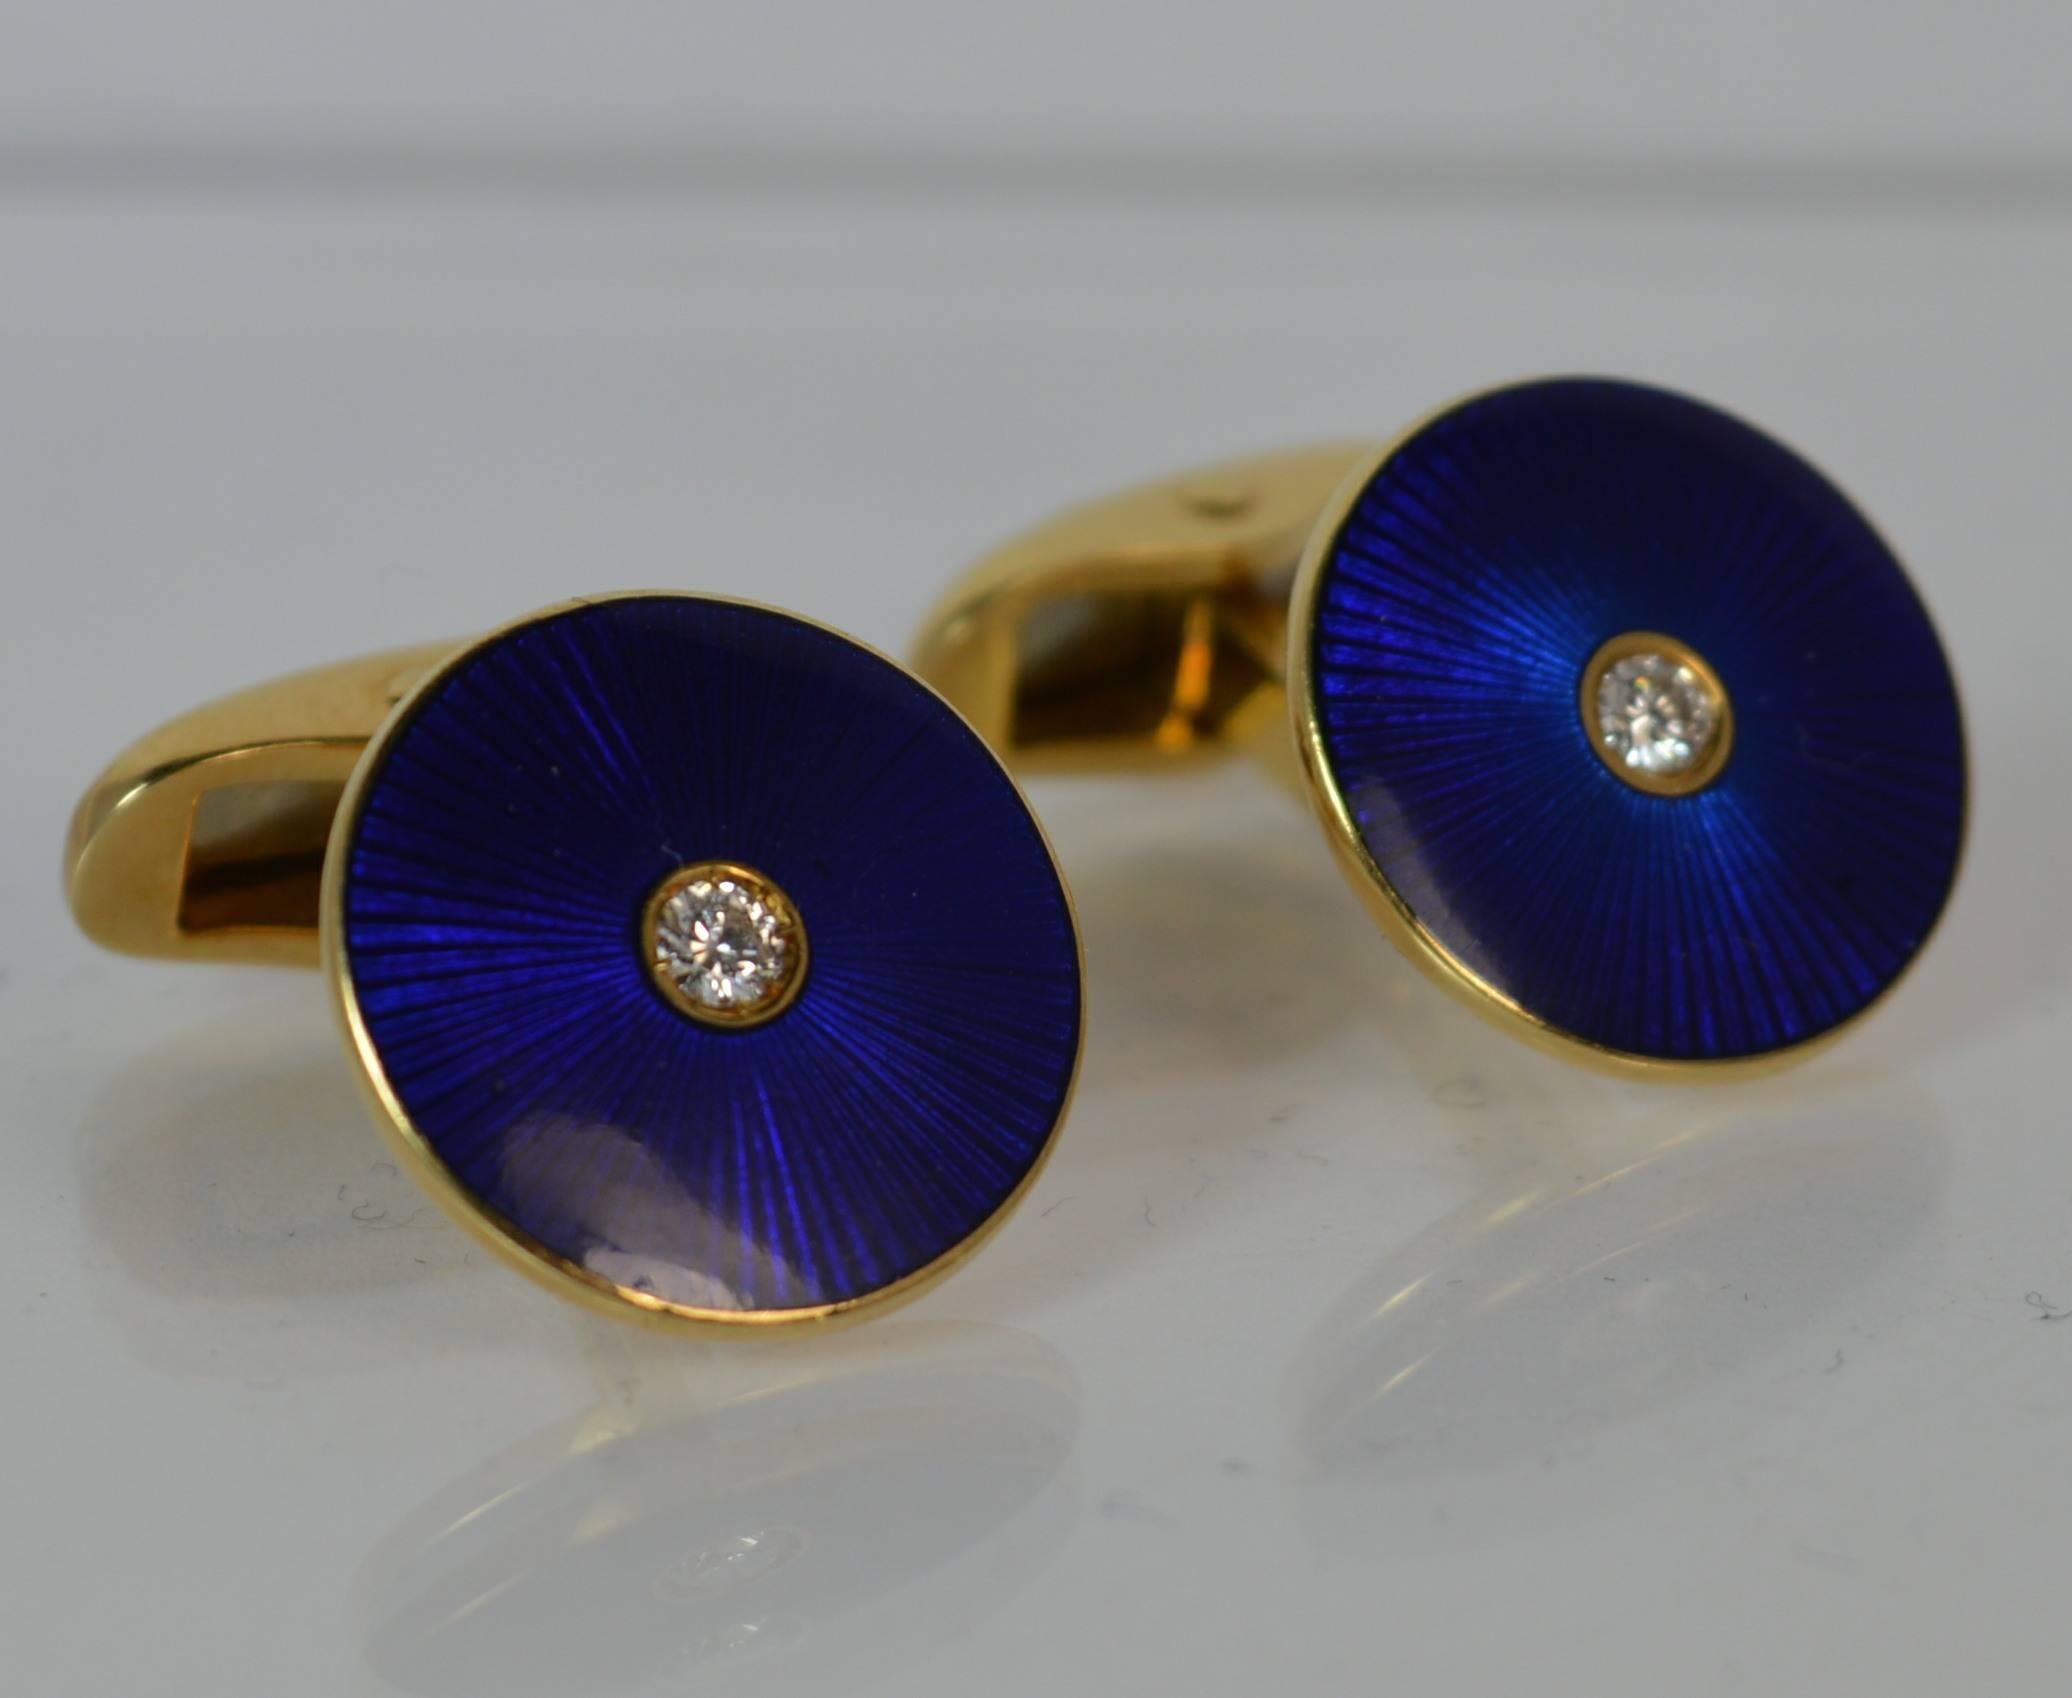 
A stunning quality 18ct Gold, Guilloche Enamel and Diamond cufflinks by the famous Faberge.


​Stylish shape and design. Circular shape with a VVS round brilliant cut diamond to the centre and deep Royal blue enamel surrounding.


Full hallmarks